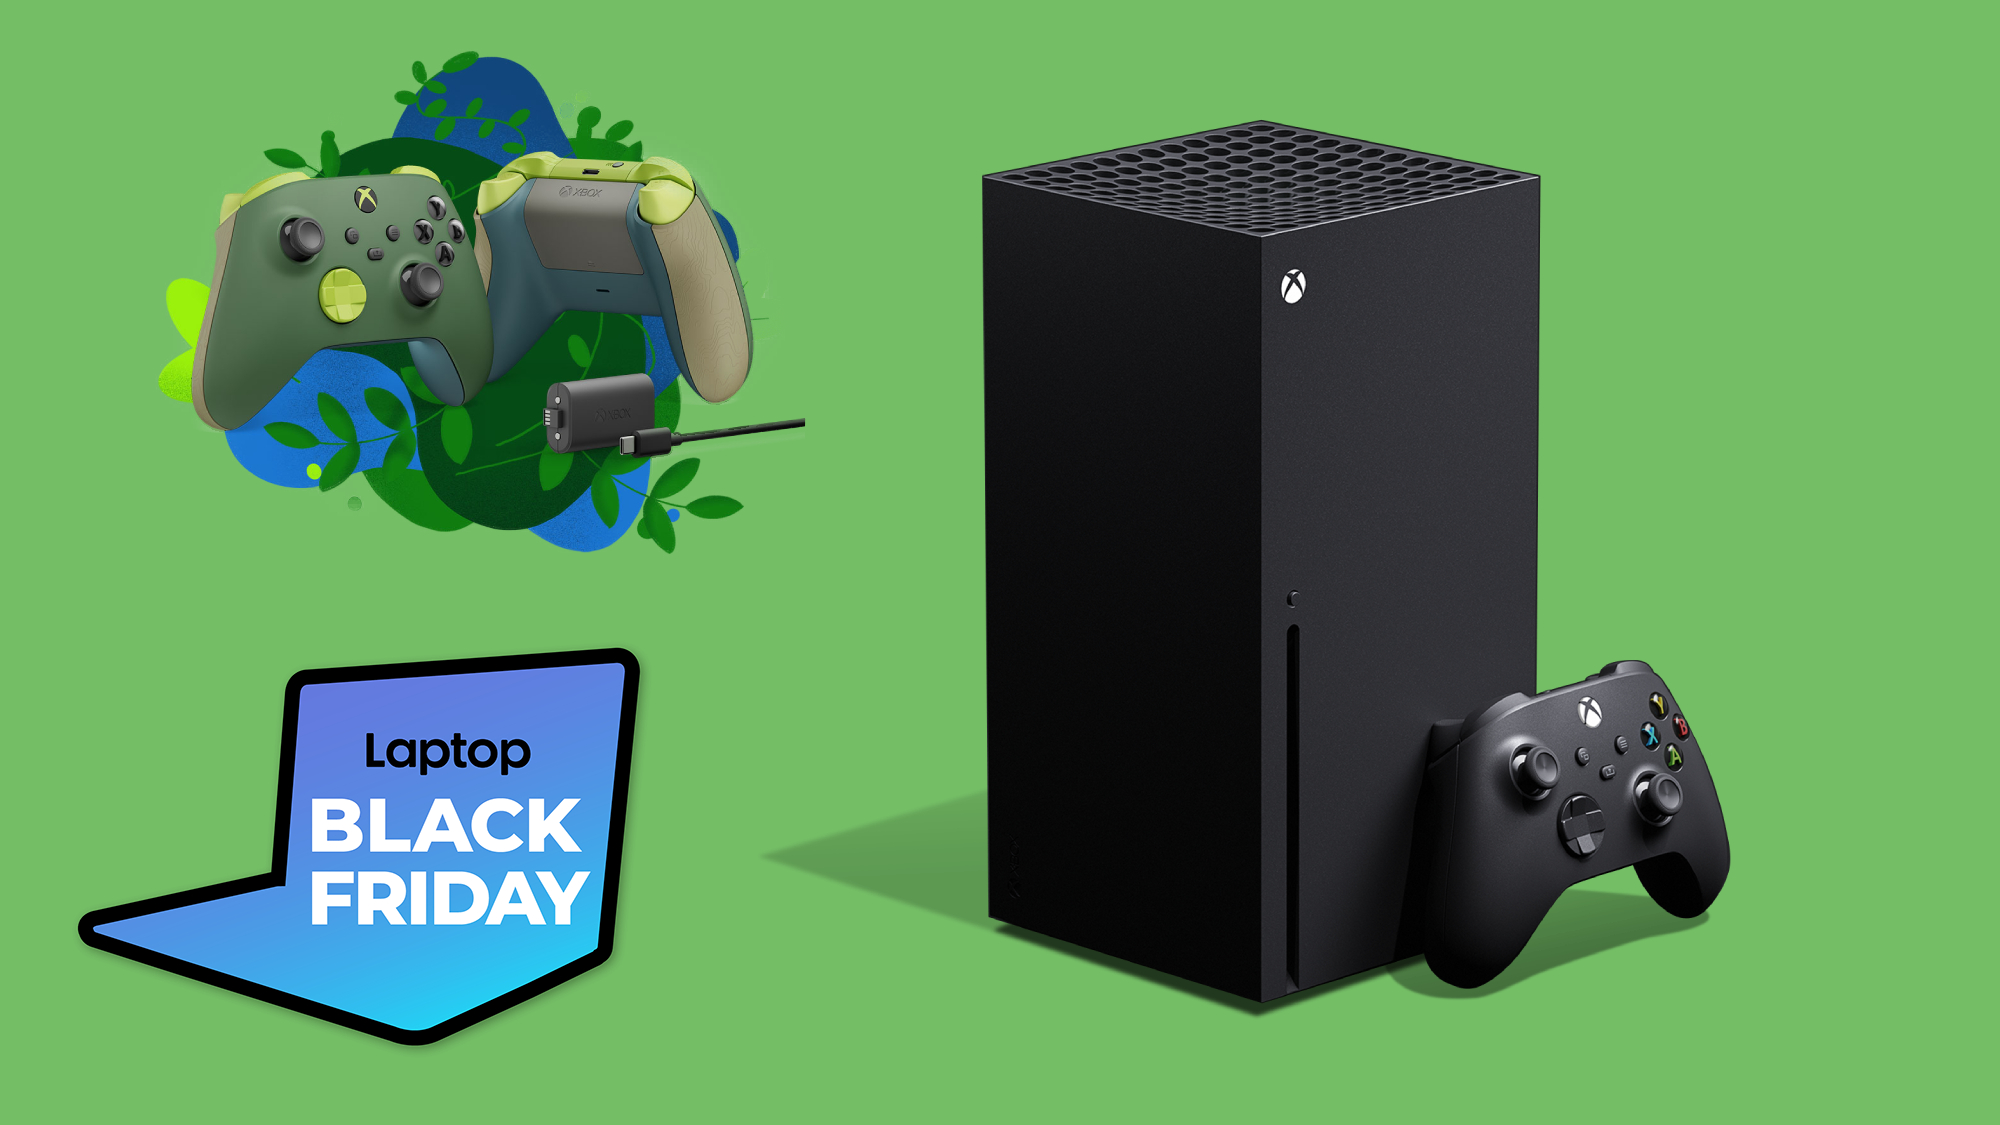 GameStop's Black Friday deals offer Xbox Series X bundle, games and more